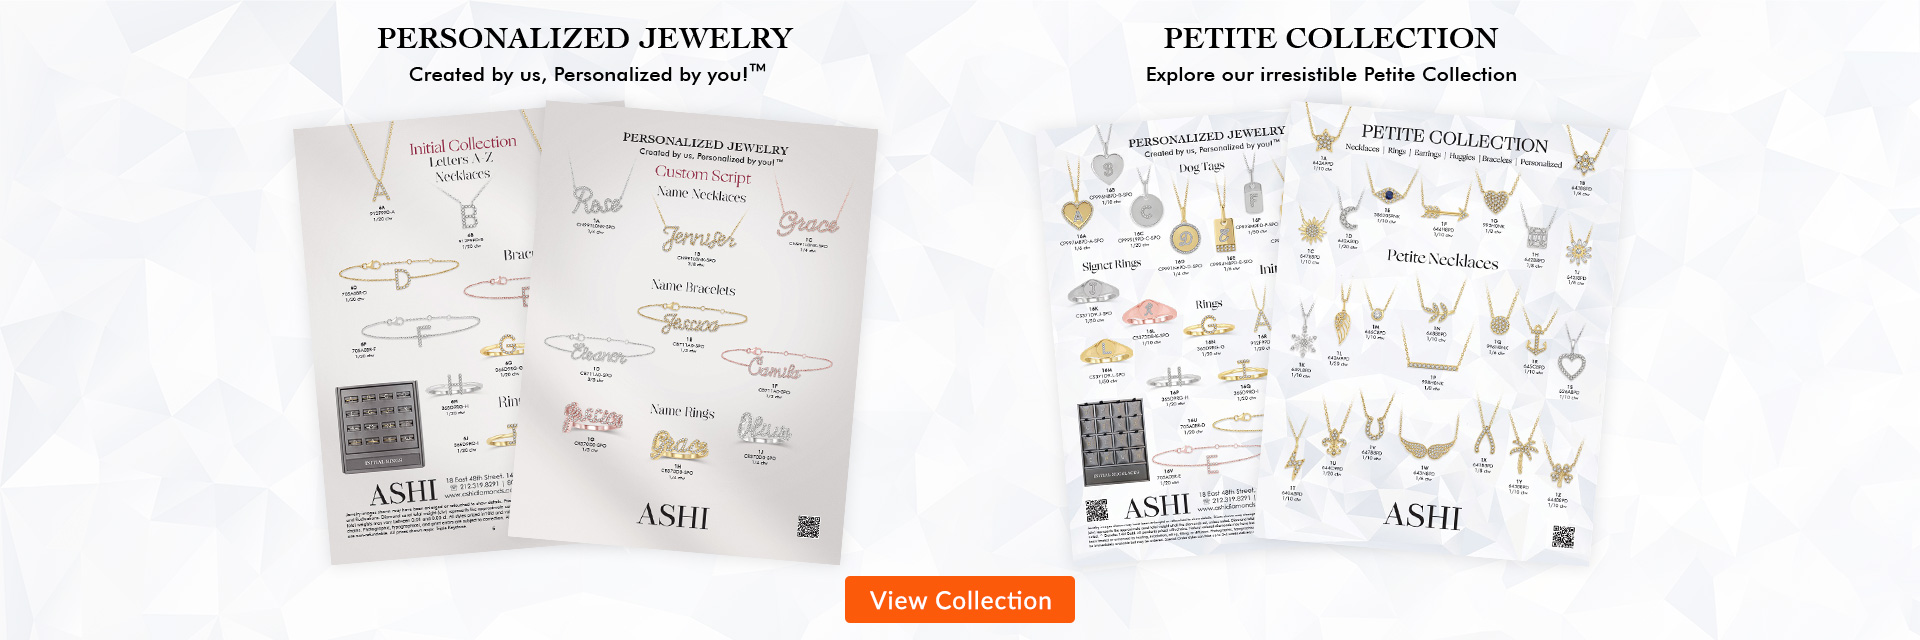 Personalized Jewelry and Petite Collection